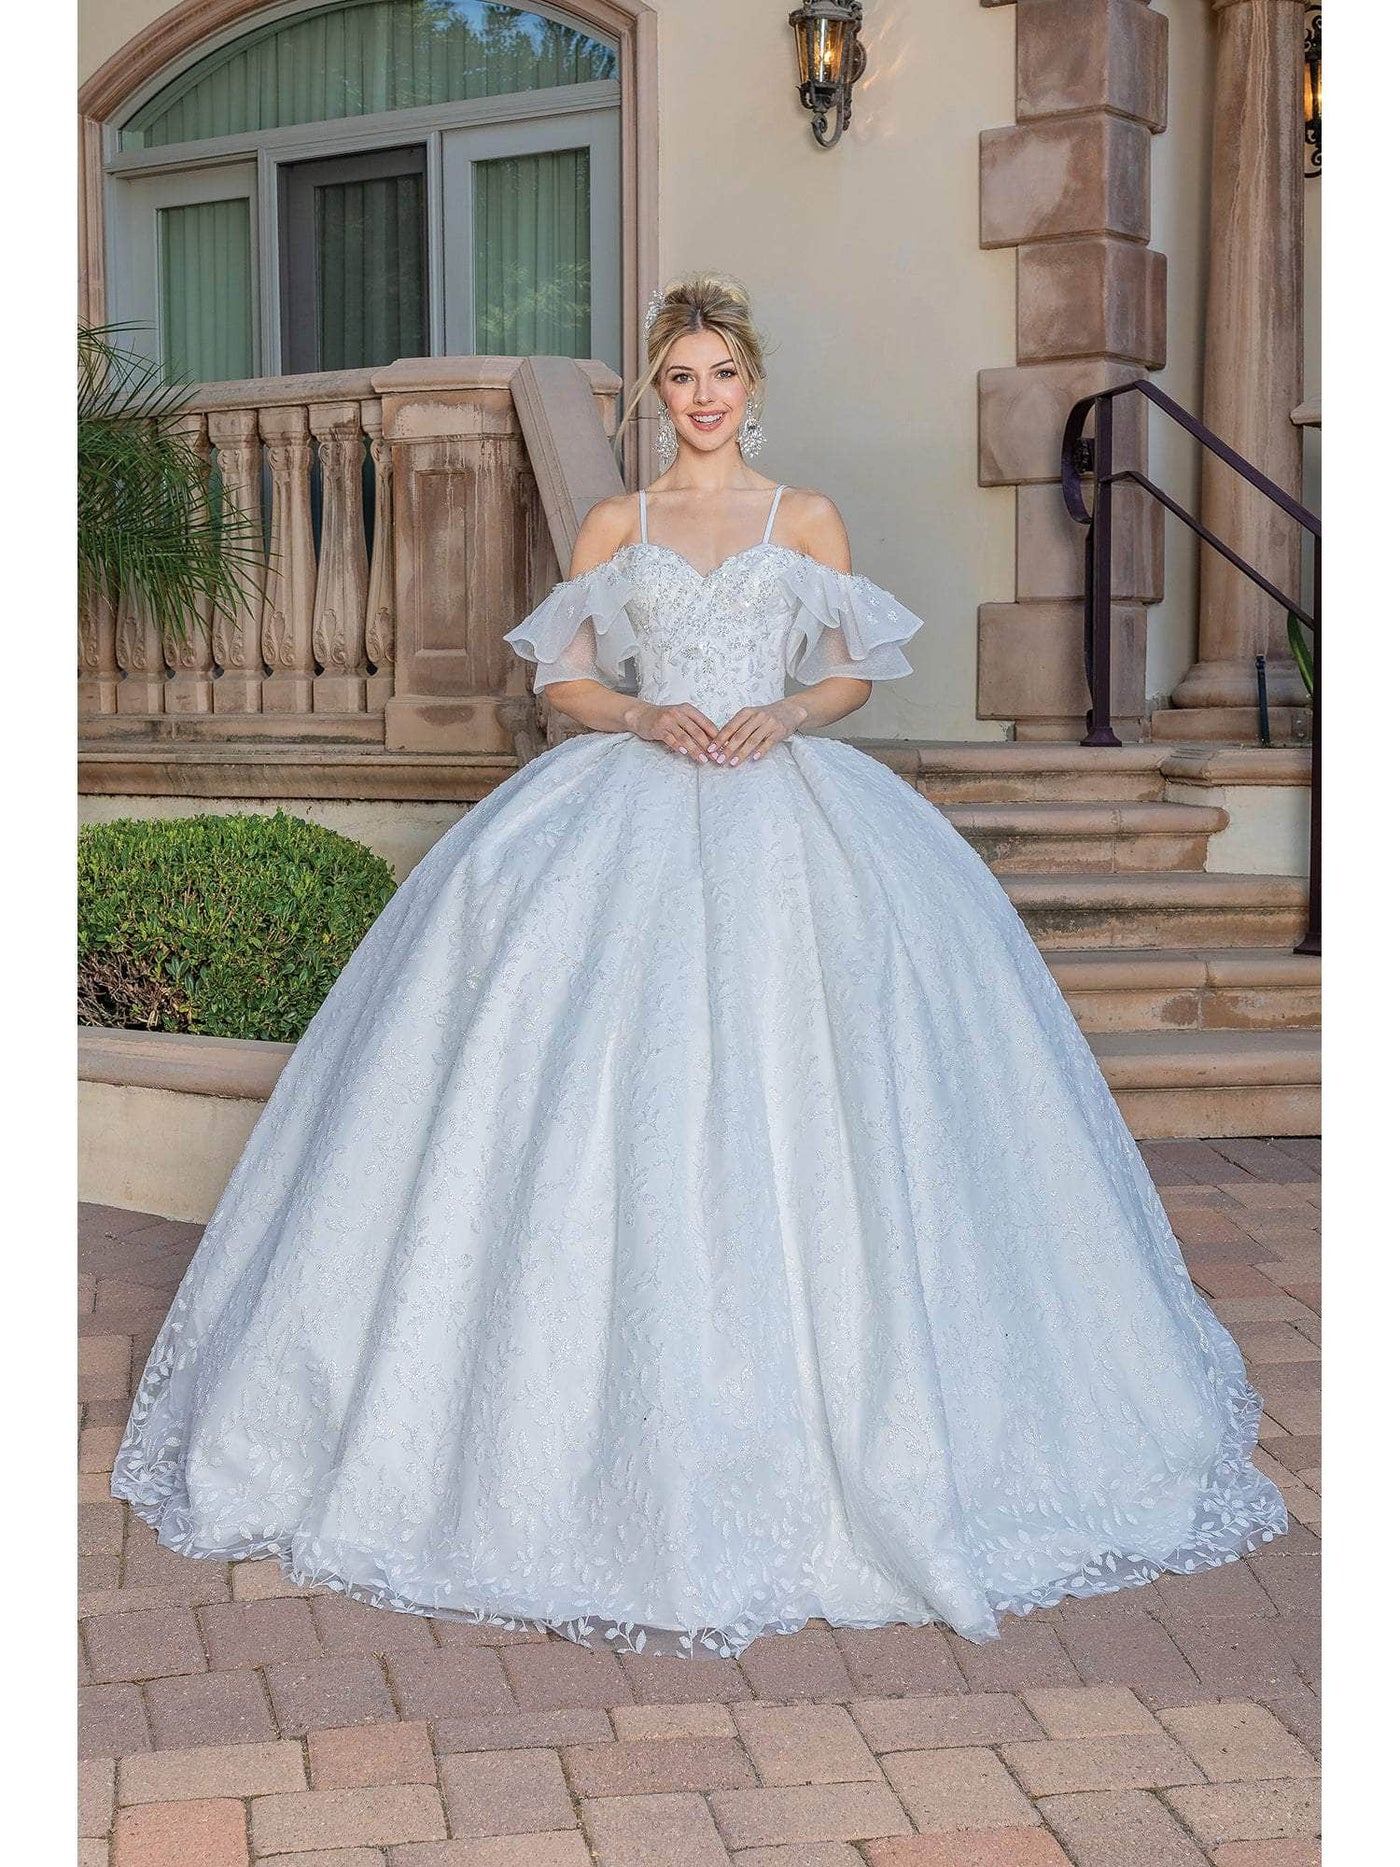 Dancing Queen 0228 - Sweetheart Embroidered Ballgown Special Occasion Dresses